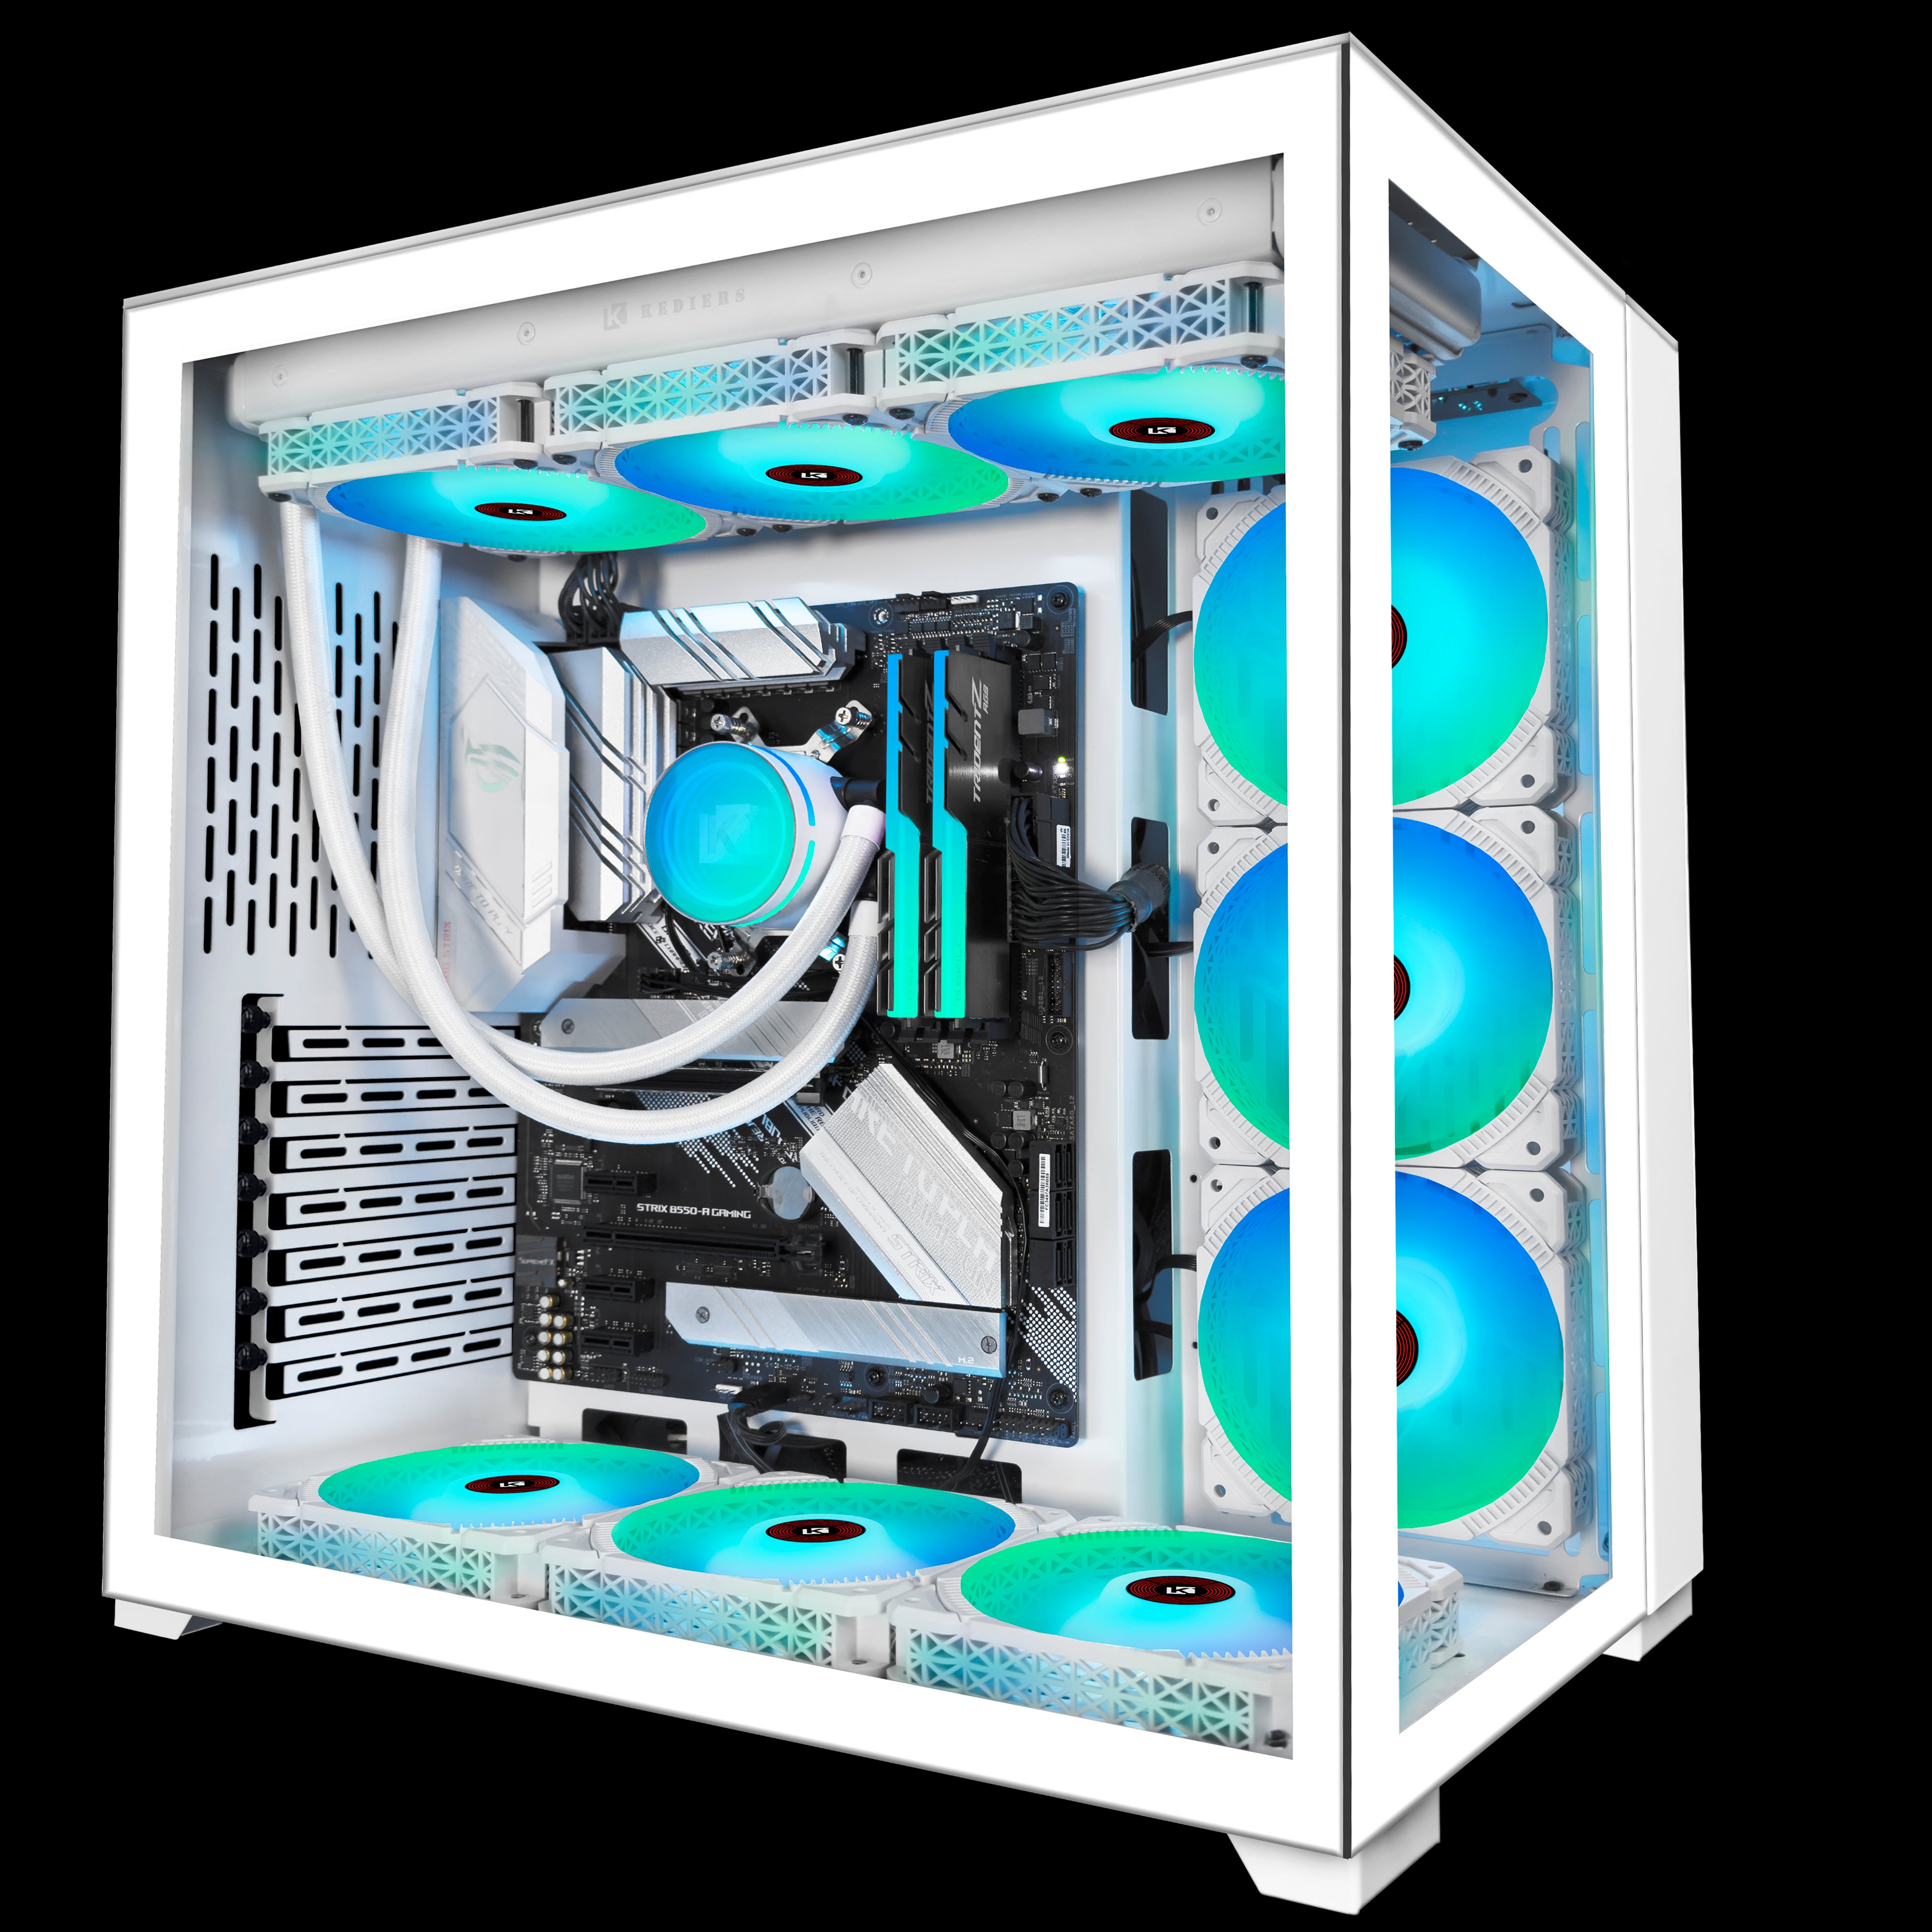 KEDIERS Mid-Tower ATX PC Case with 9pcs 120mm ARGB Fans, Mesh Computer Gaming Case, Opening Tempered Glass Side Panels, USB 3.0 x 2, White, C590